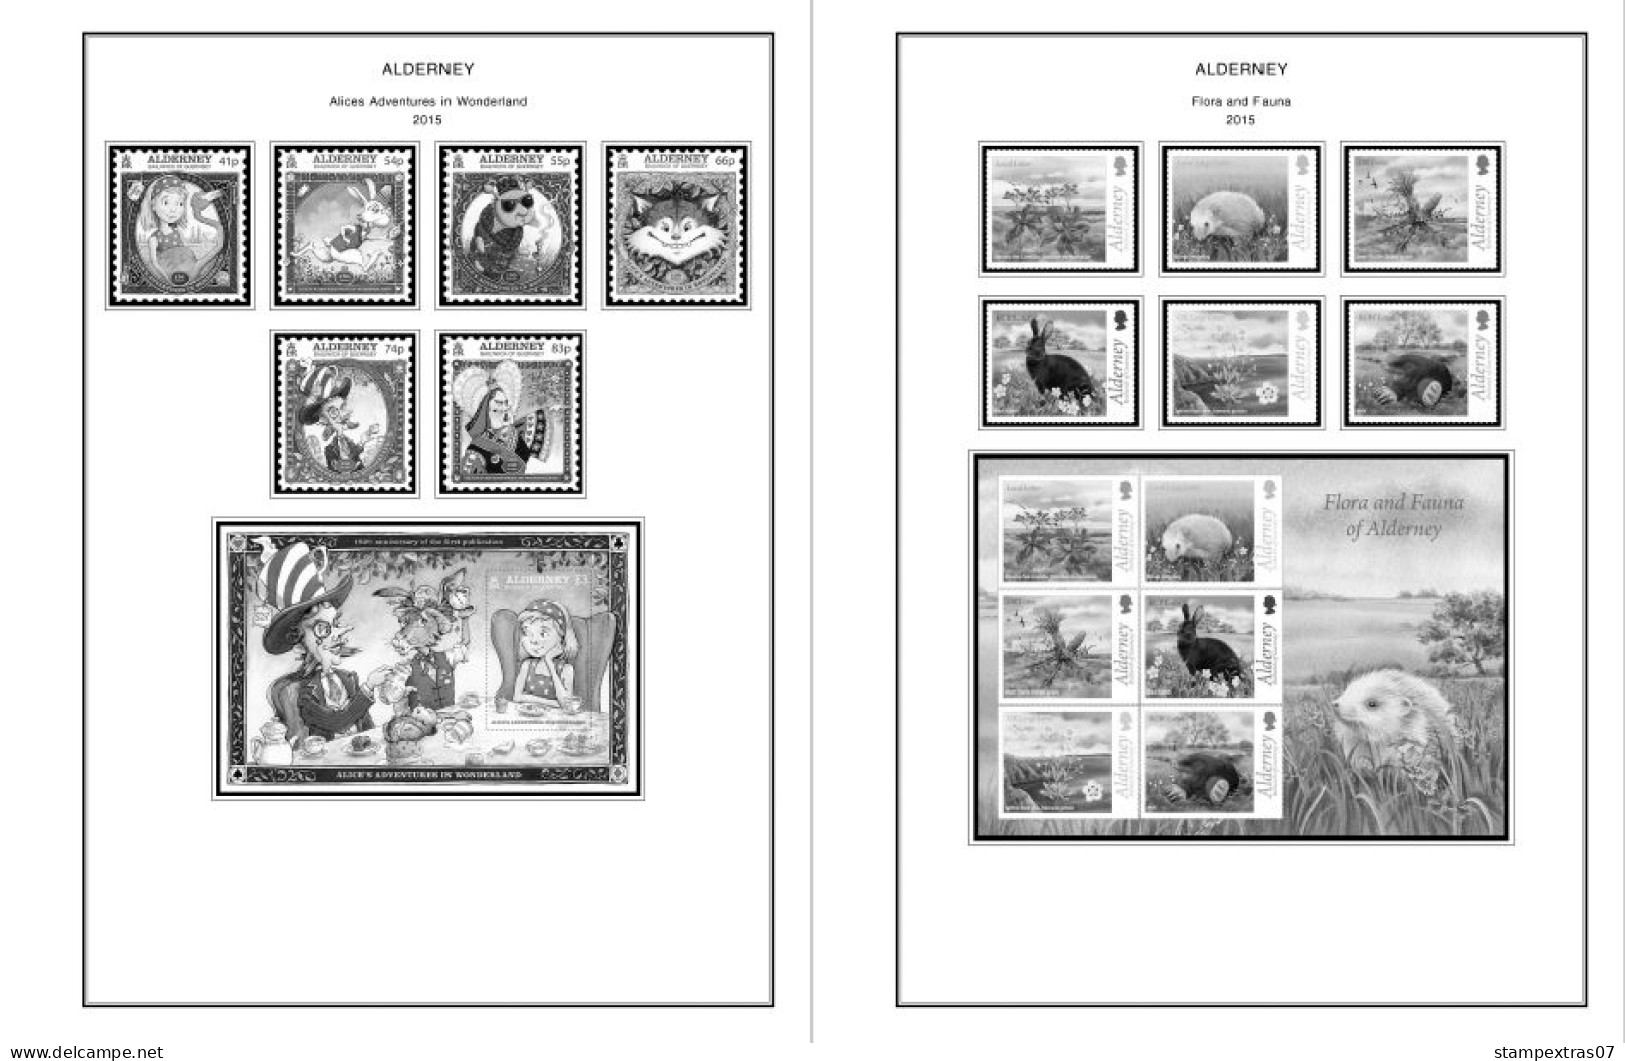 GB ALDERNEY 1983-2010 + 2011-2020 STAMP ALBUM PAGES (89 b&w illustrated pages)